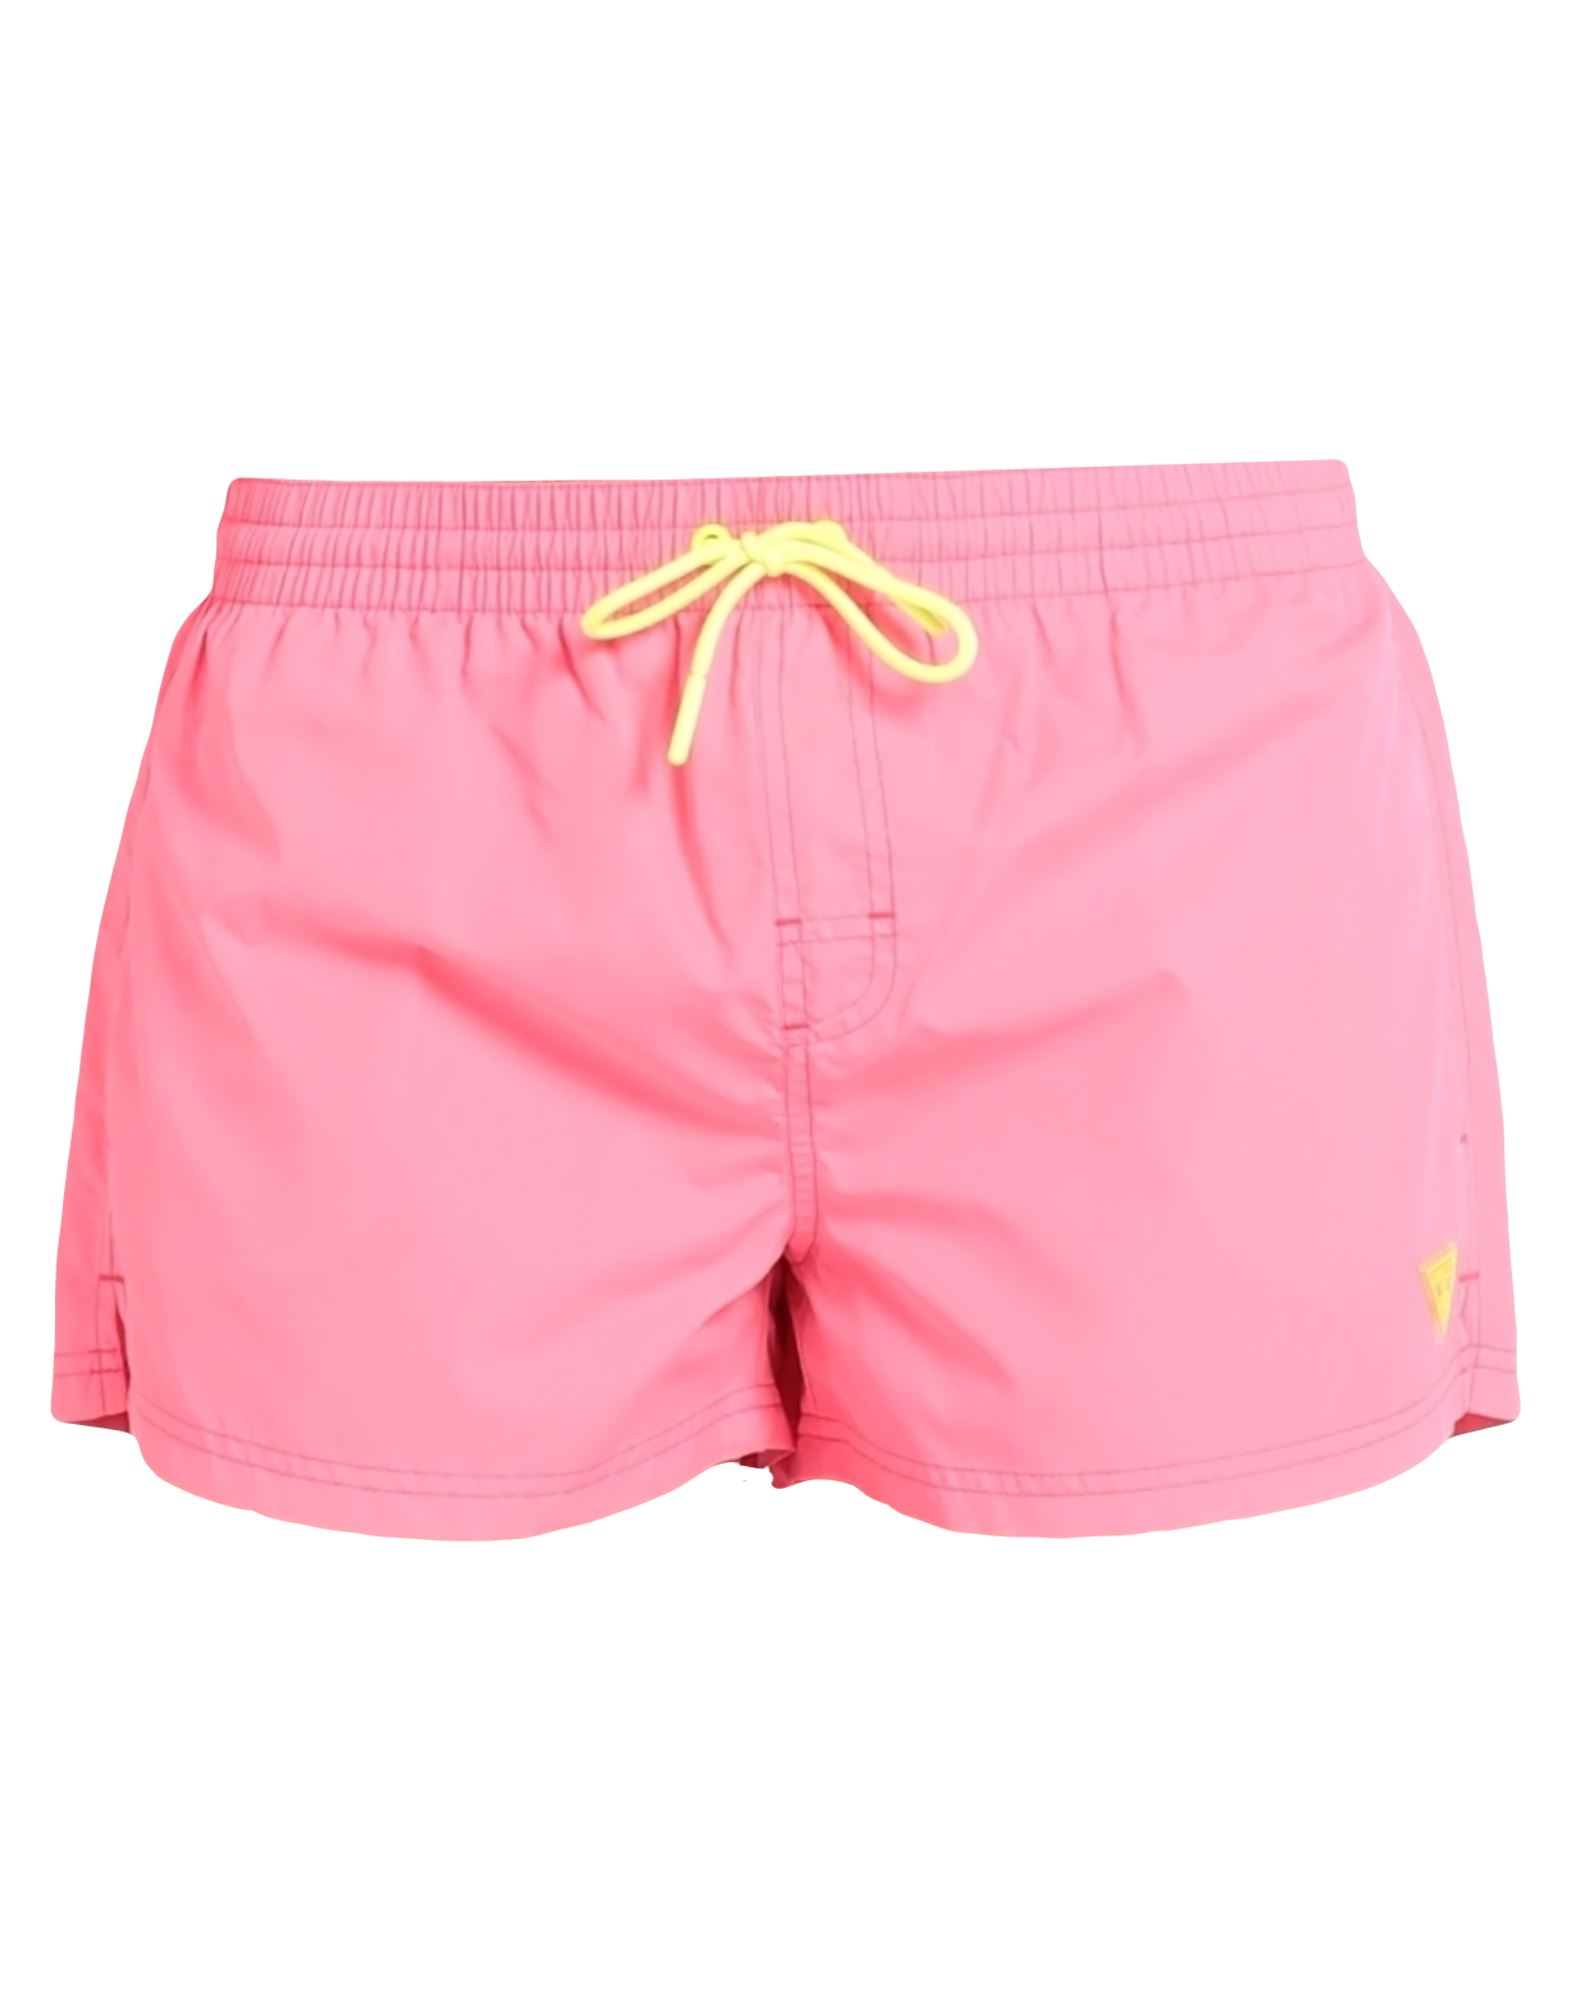 Guess Swim Trunks In Pink